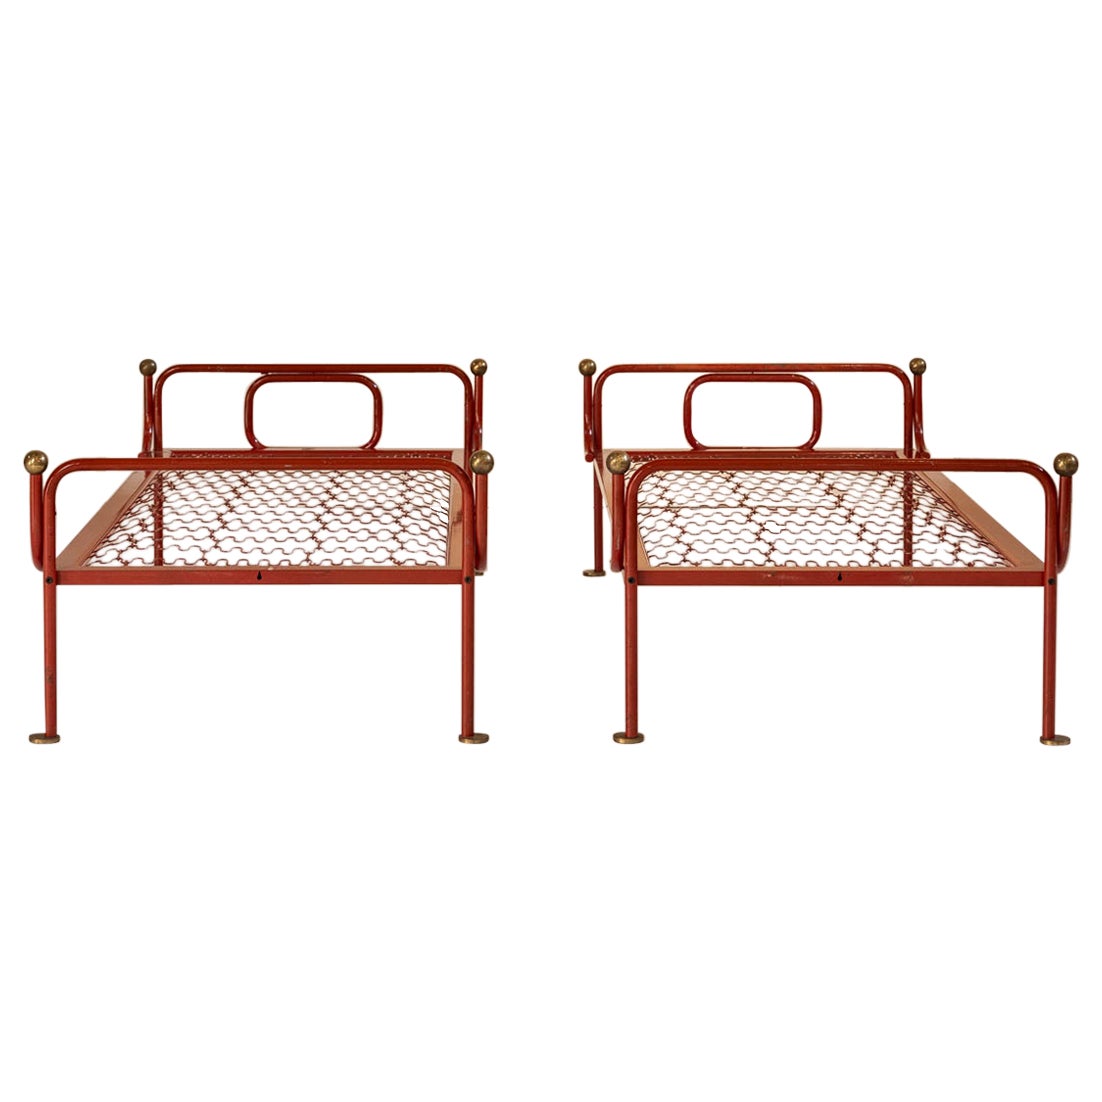 Midcentury pair of beds attributed to Luigi Caccia Dominioni for Azucena